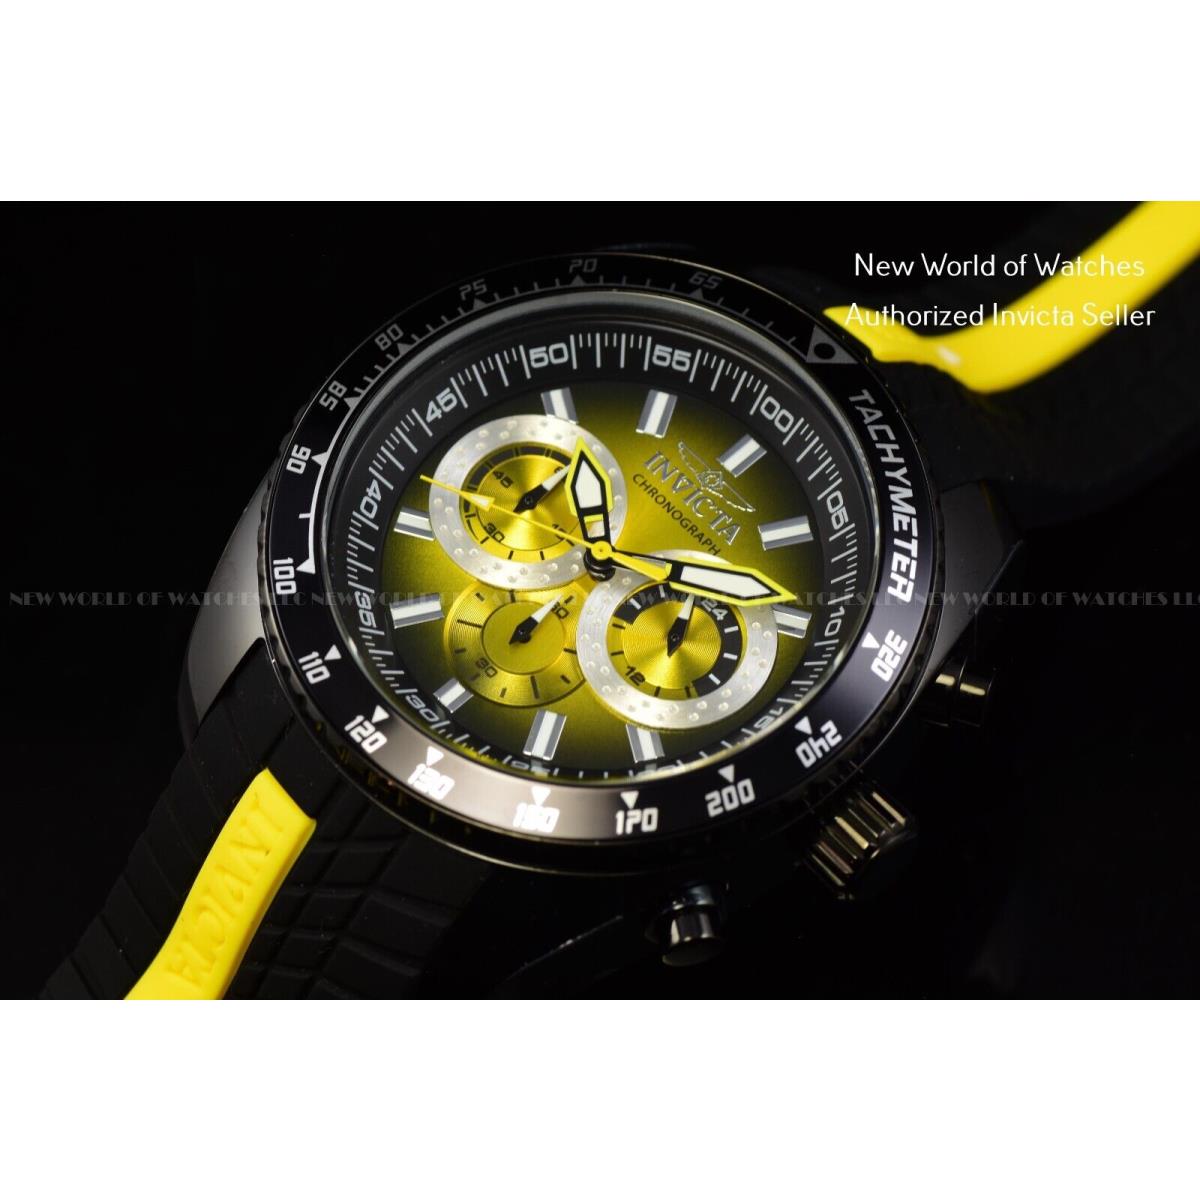 Invicta watch Rally - Yellow Dial, Two-tone (Black and Yellow) Band, Black Bezel